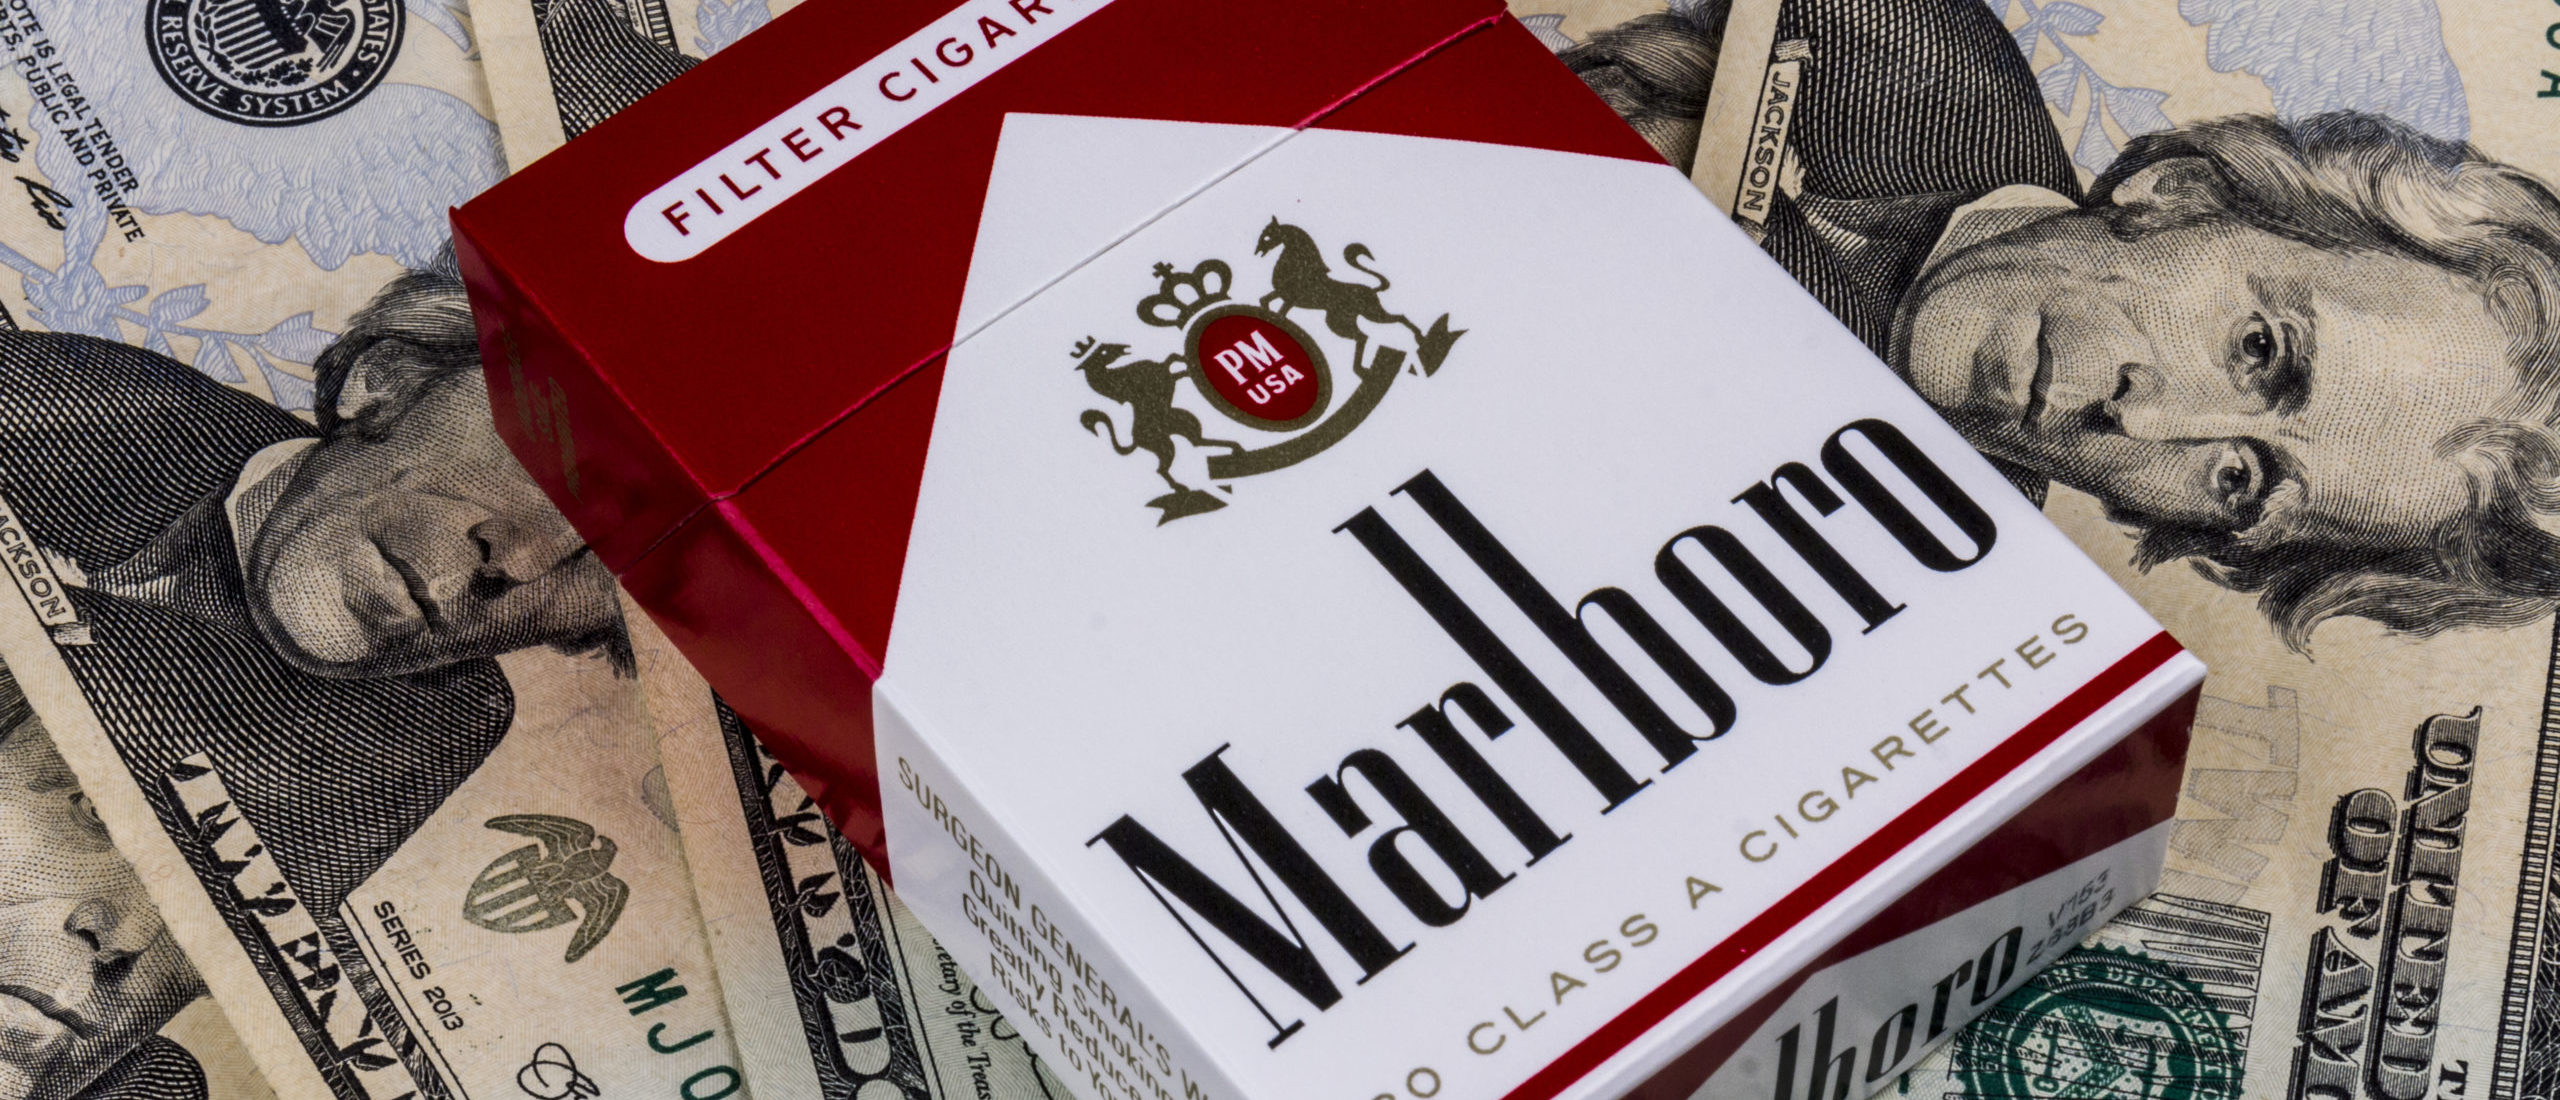 Pack of Marlboro Cigarettes by Jonathan Weiss. By Shutterstock.